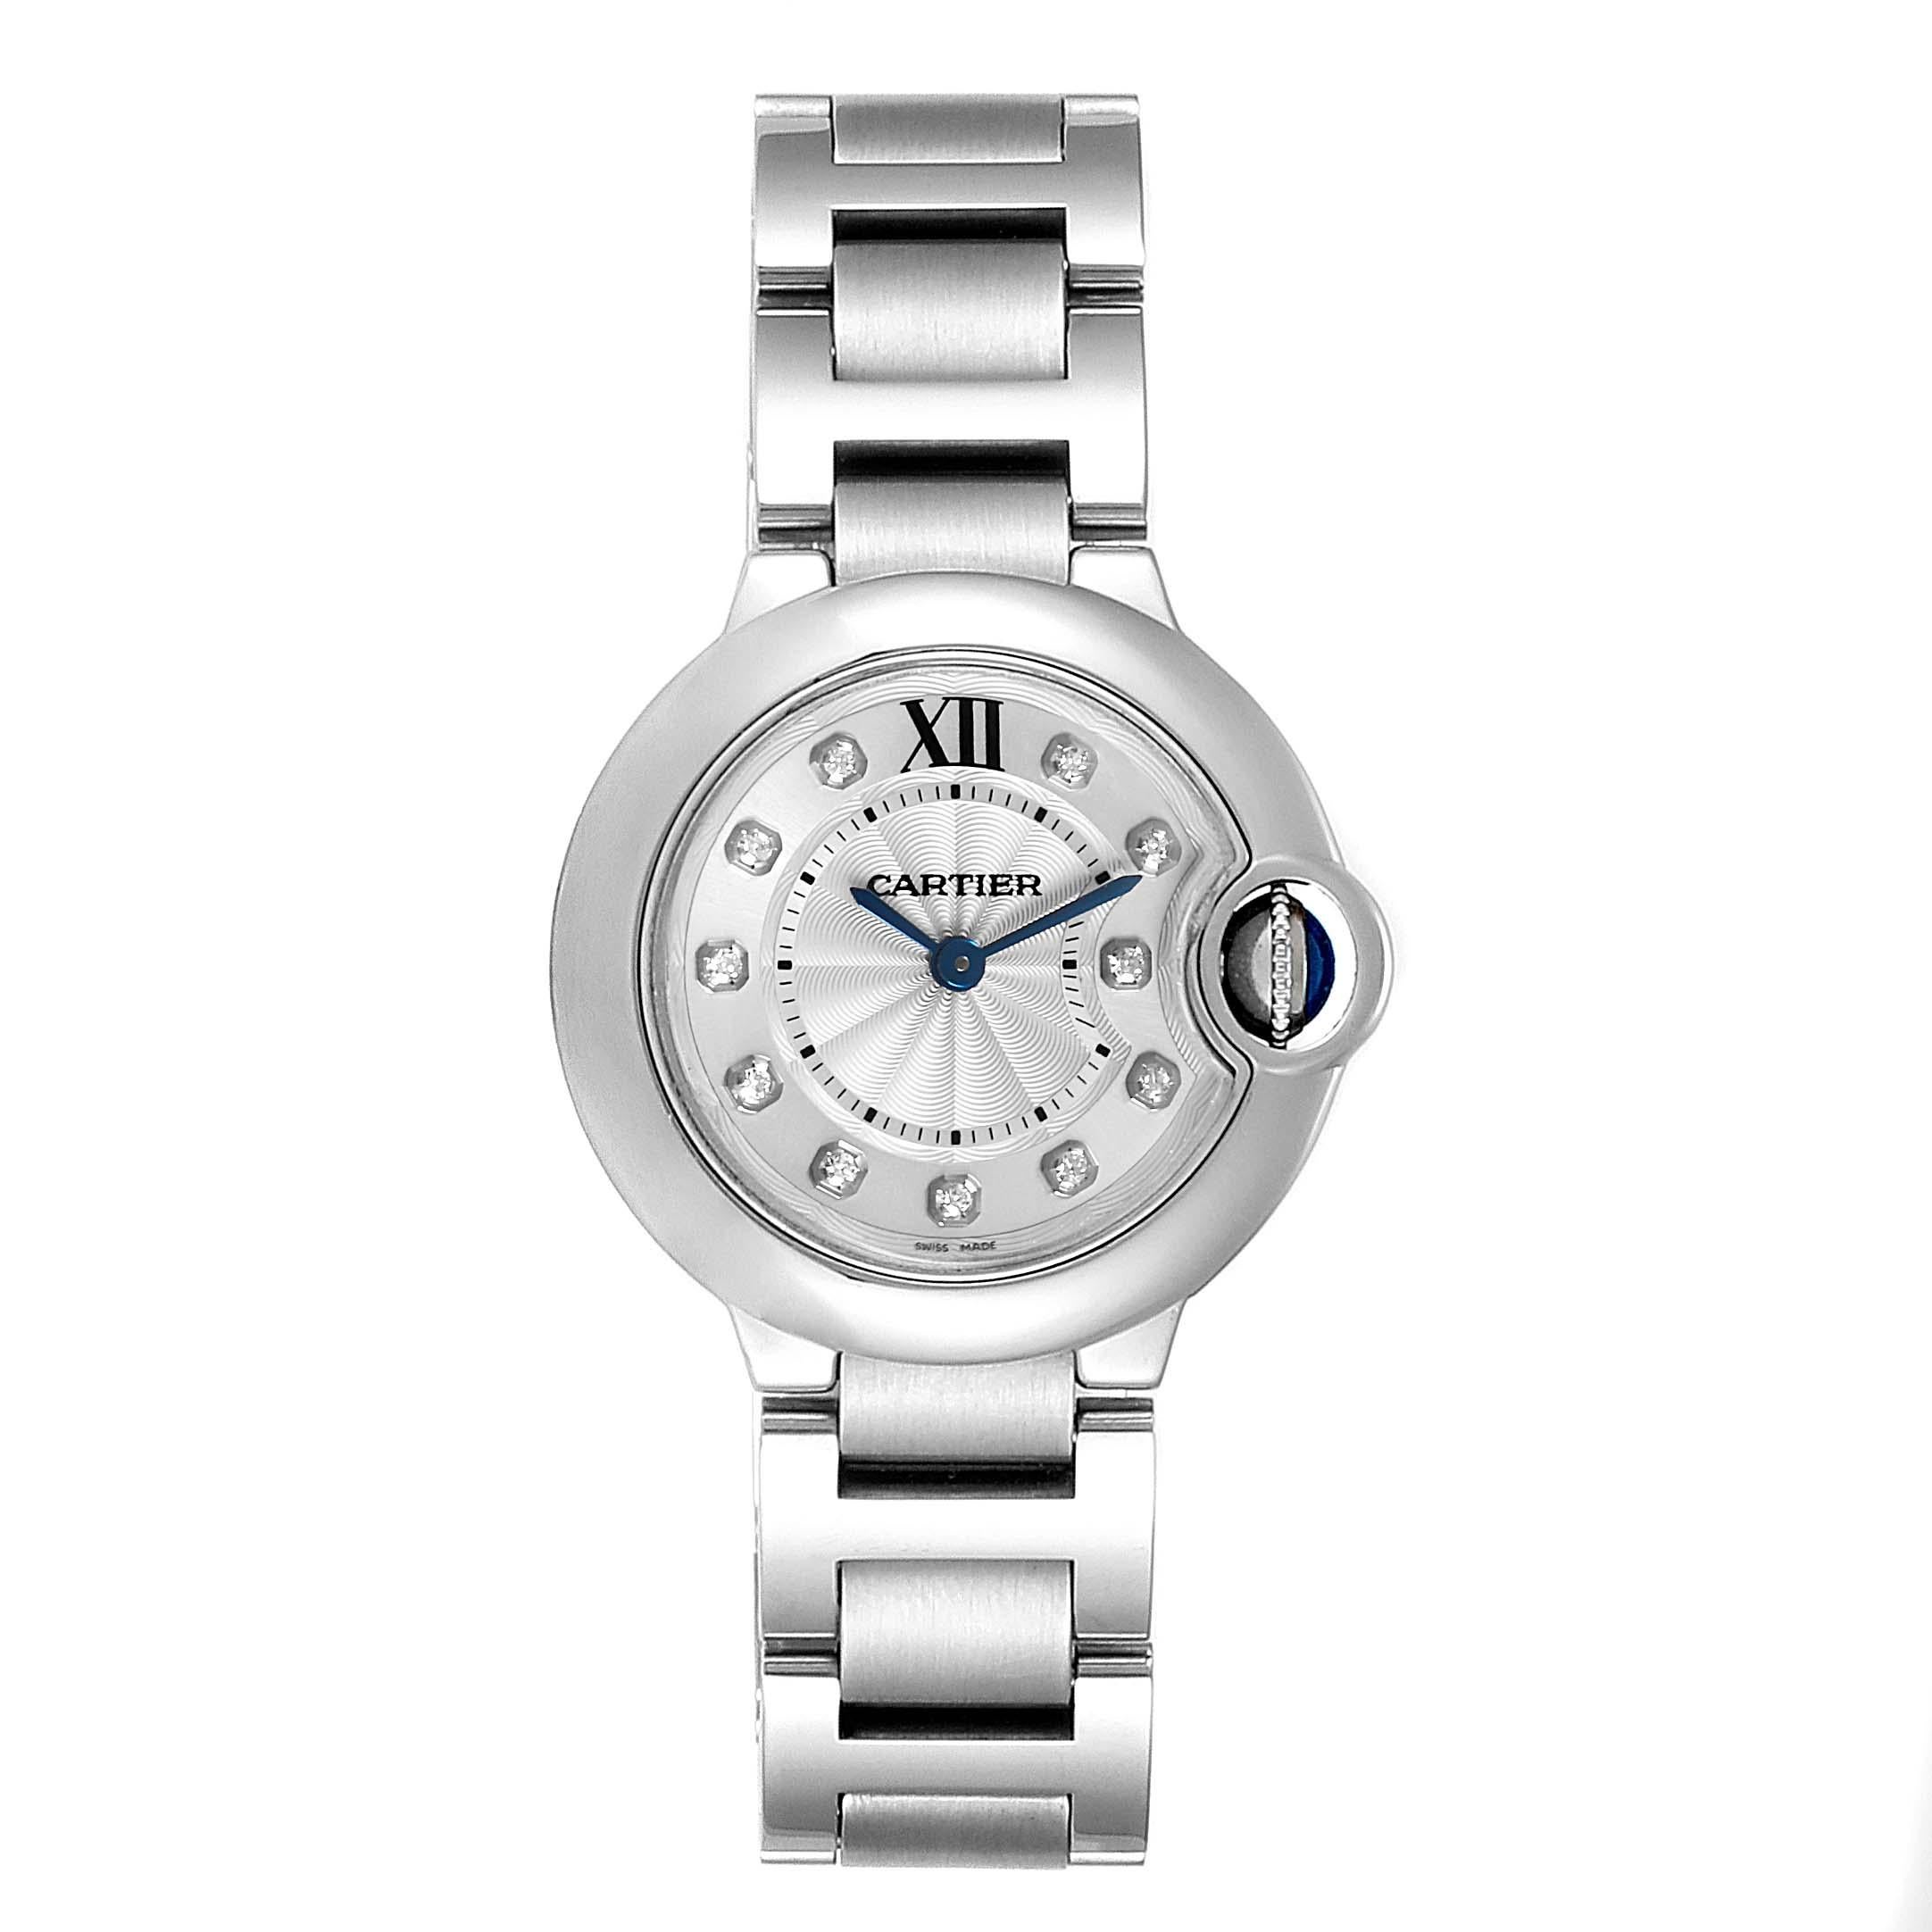 Cartier Ballon Blue Diamond Dial Steel Ladies Watch WE902073 Box Papers. Quartz movement. Round stainless steel case 29.0 mm in diameter. Fluted crown set with the blue spinel cabochon. Stainless steel smooth bezel. Scratch resistant sapphire